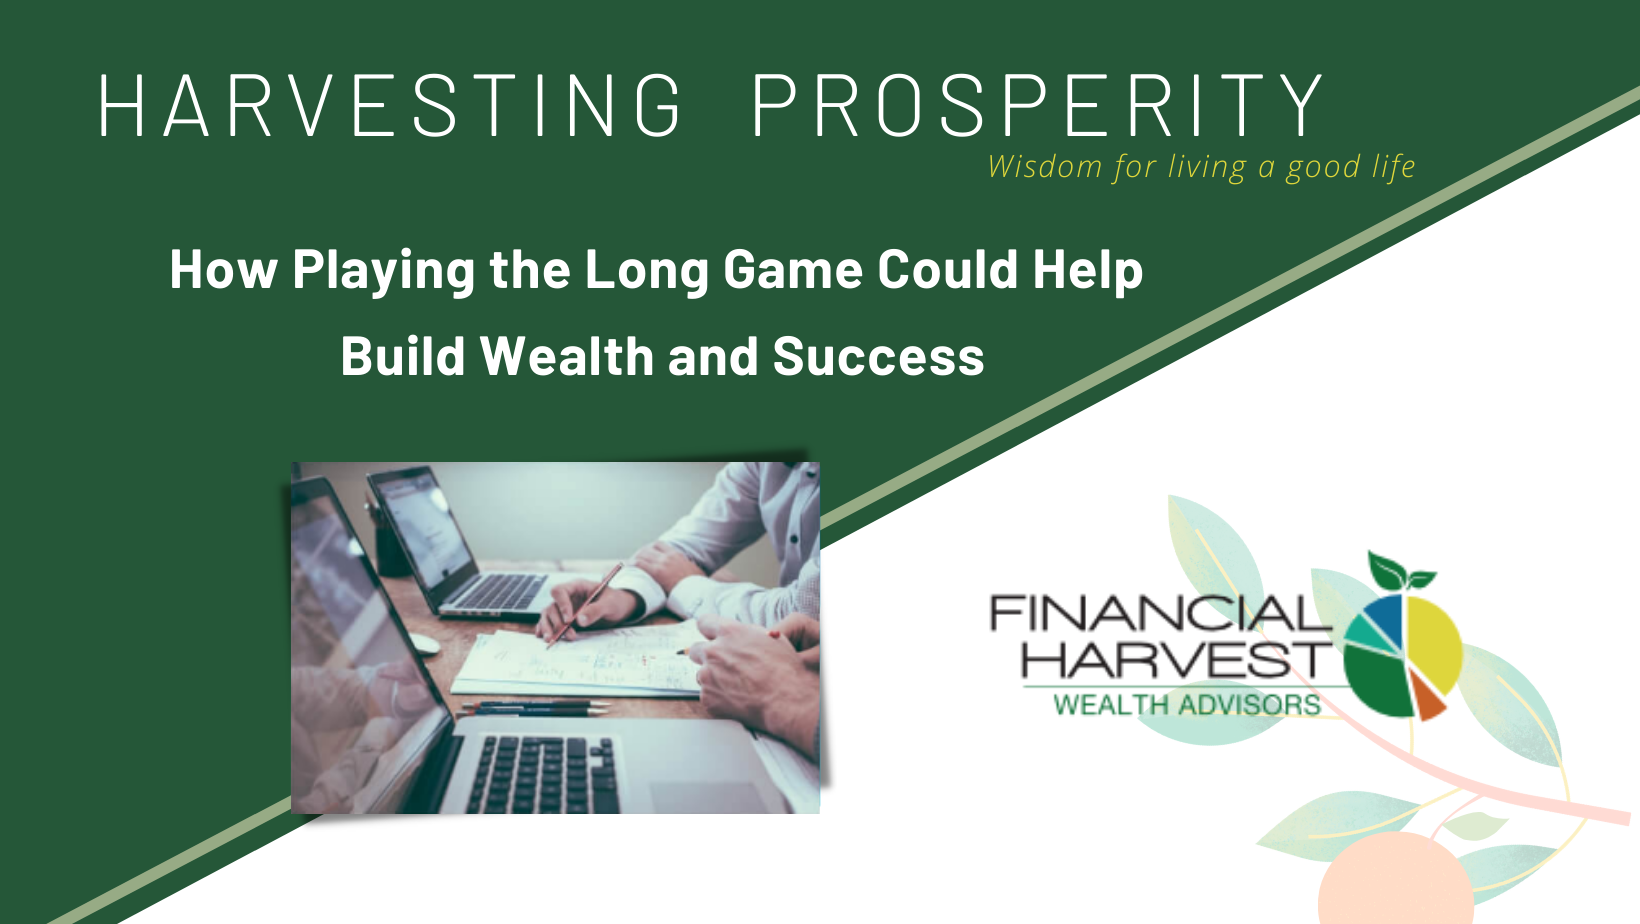 How playing the long game could help build wealth and success - harvesting prosperity january 2020